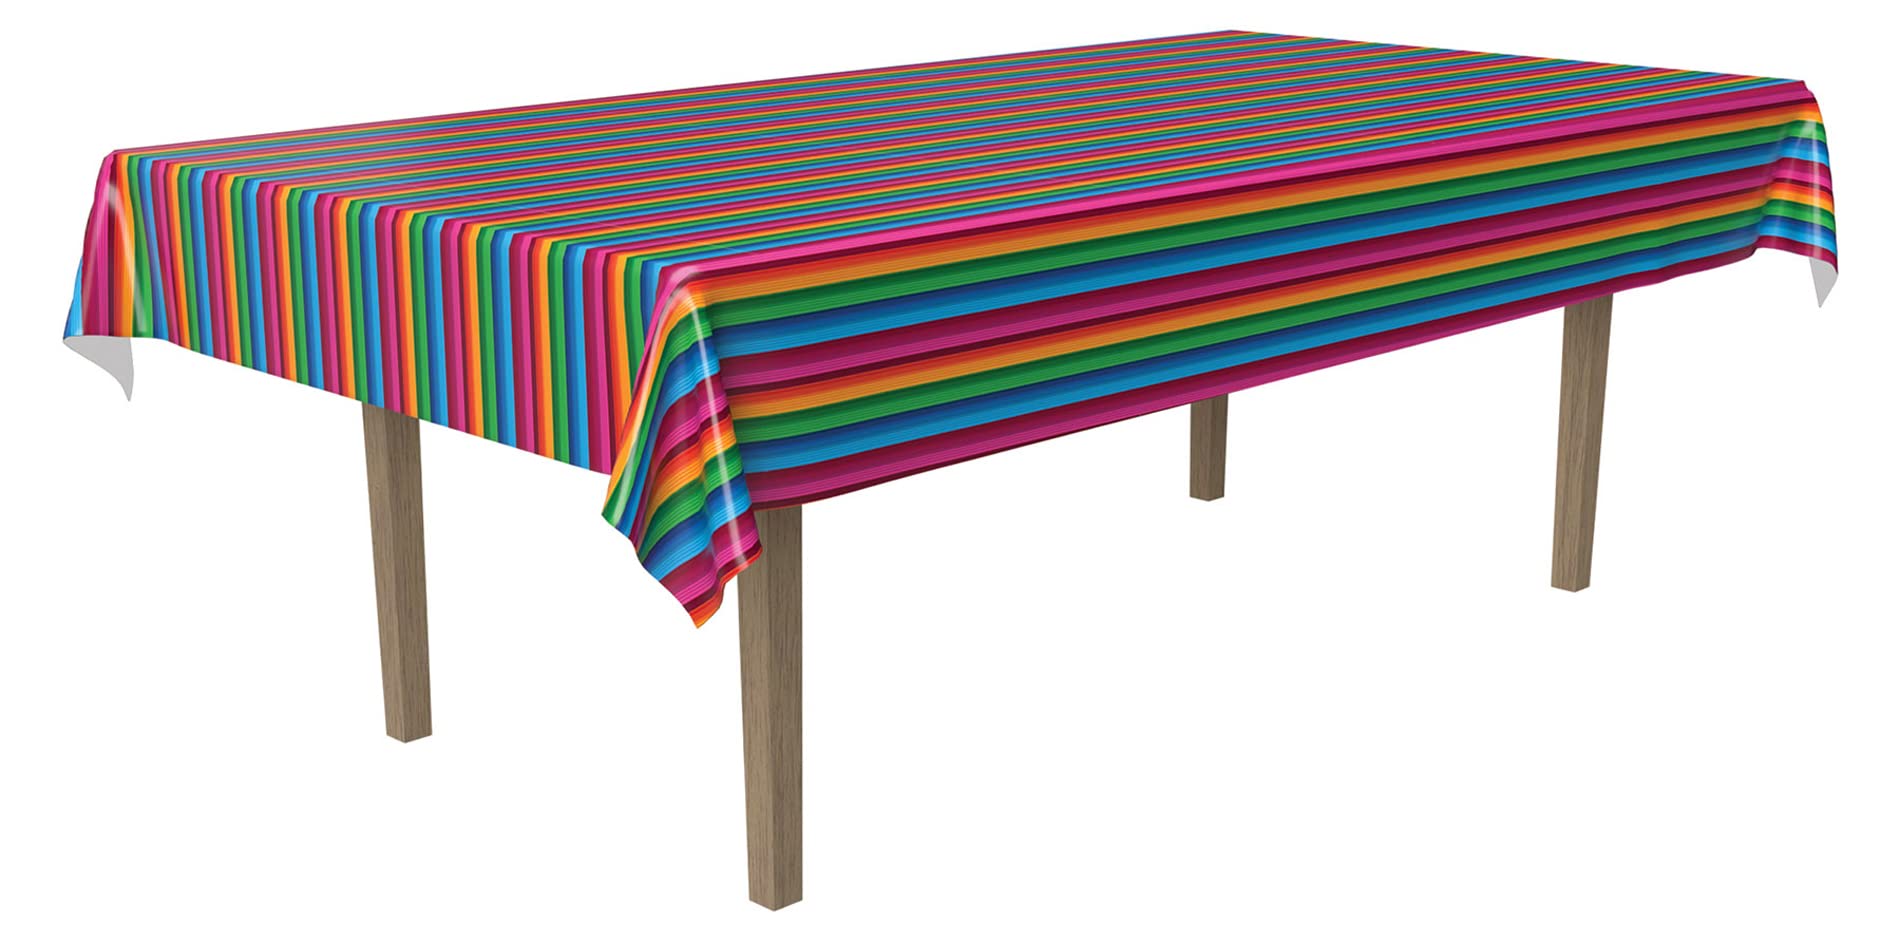 Beistle Fiesta Tablecover, 54” x 108” – Plastic Table Cloth, Rectangular Tablecloth, Table Covers for Party, Cinco De Mayo Tablecloth, Fiesta Party Decorations, Cinco De Mayo Decorations